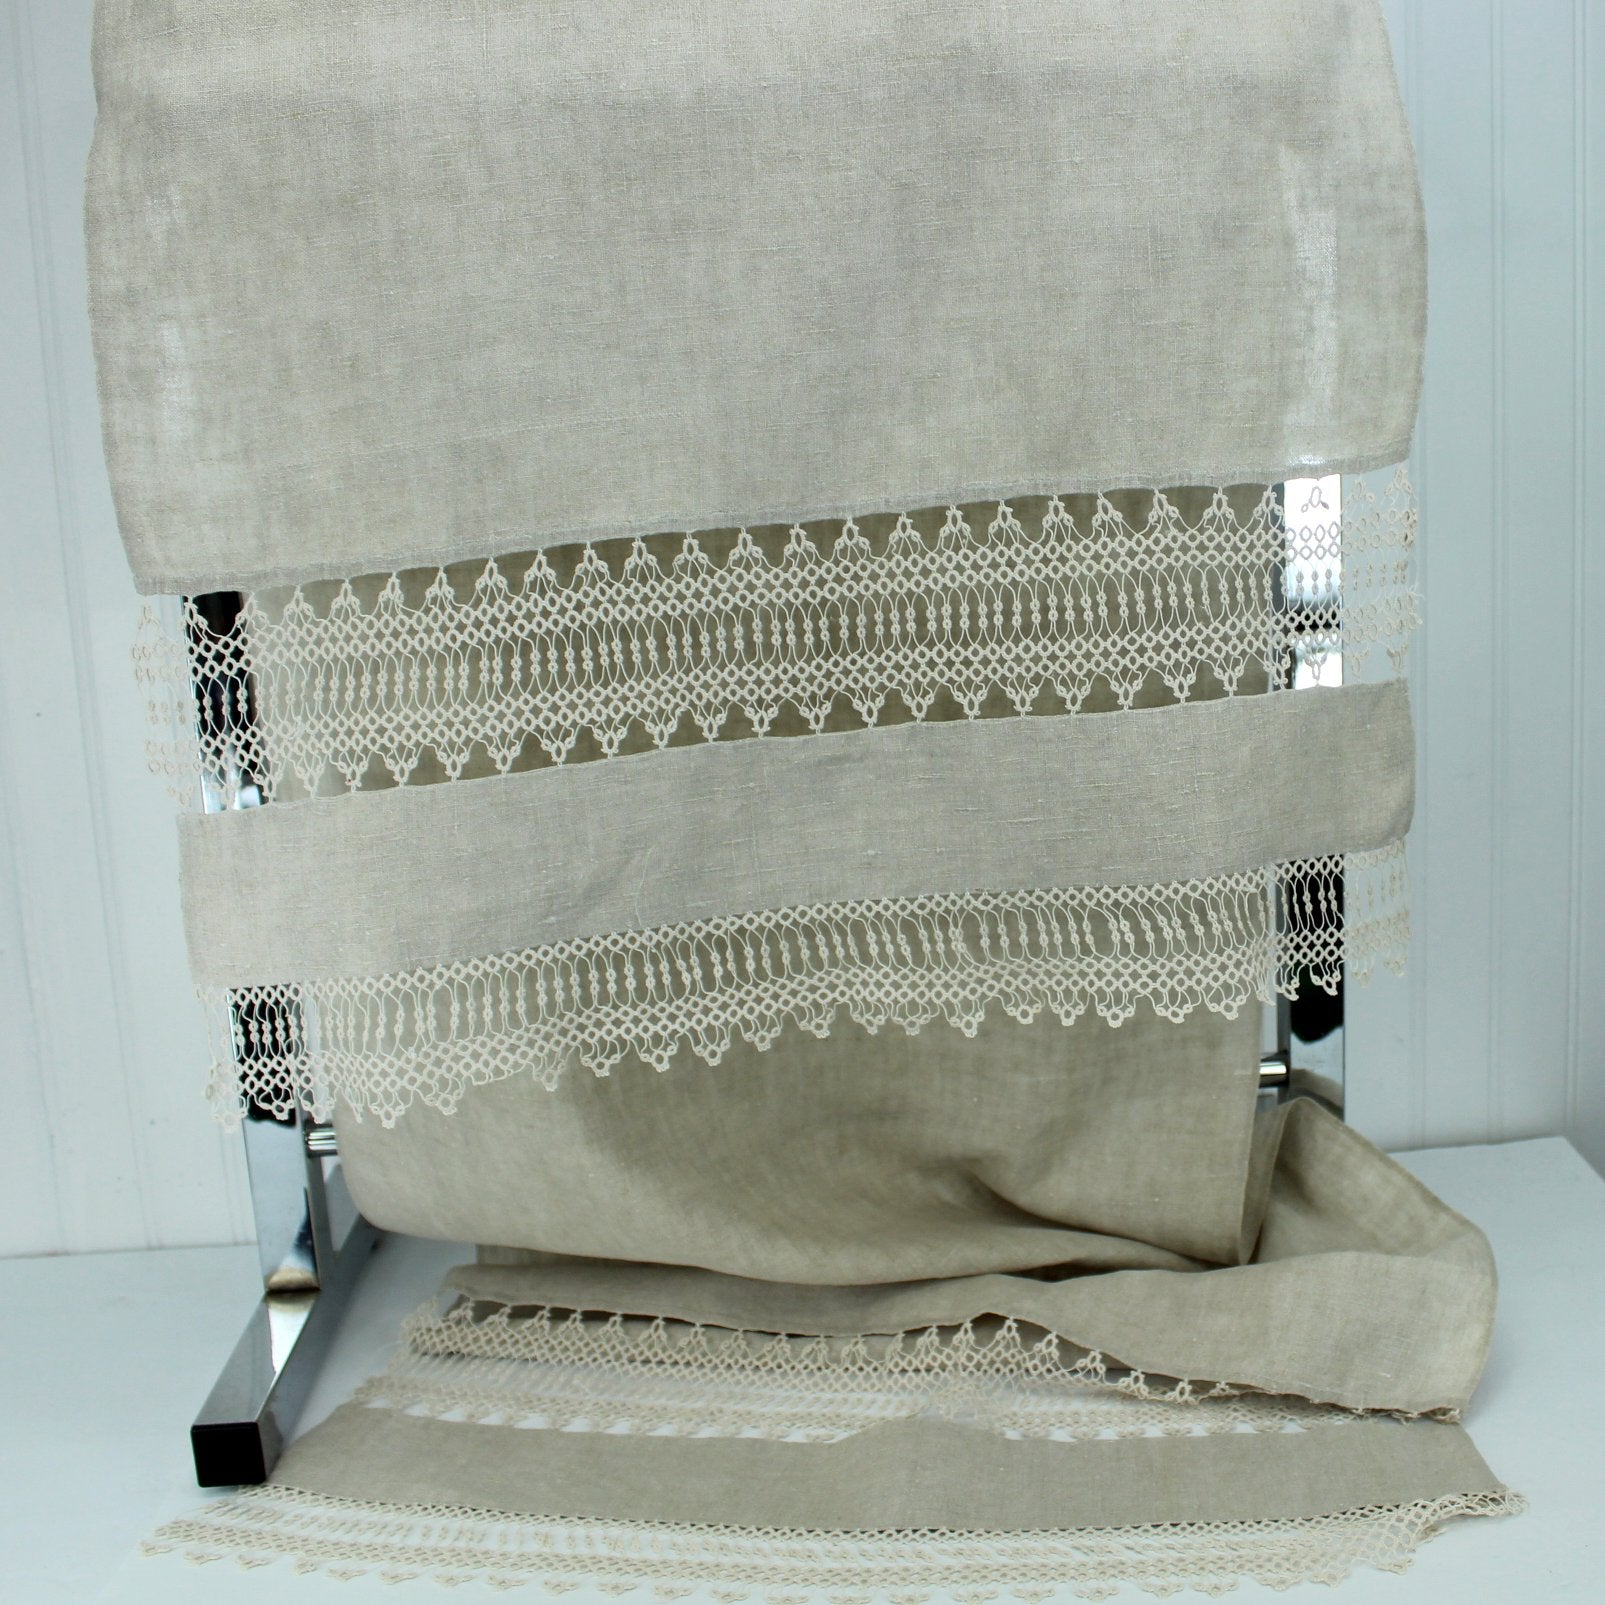 Long Antique Table Runner Natural Linen Double Tatting Inserts Great for Shawl